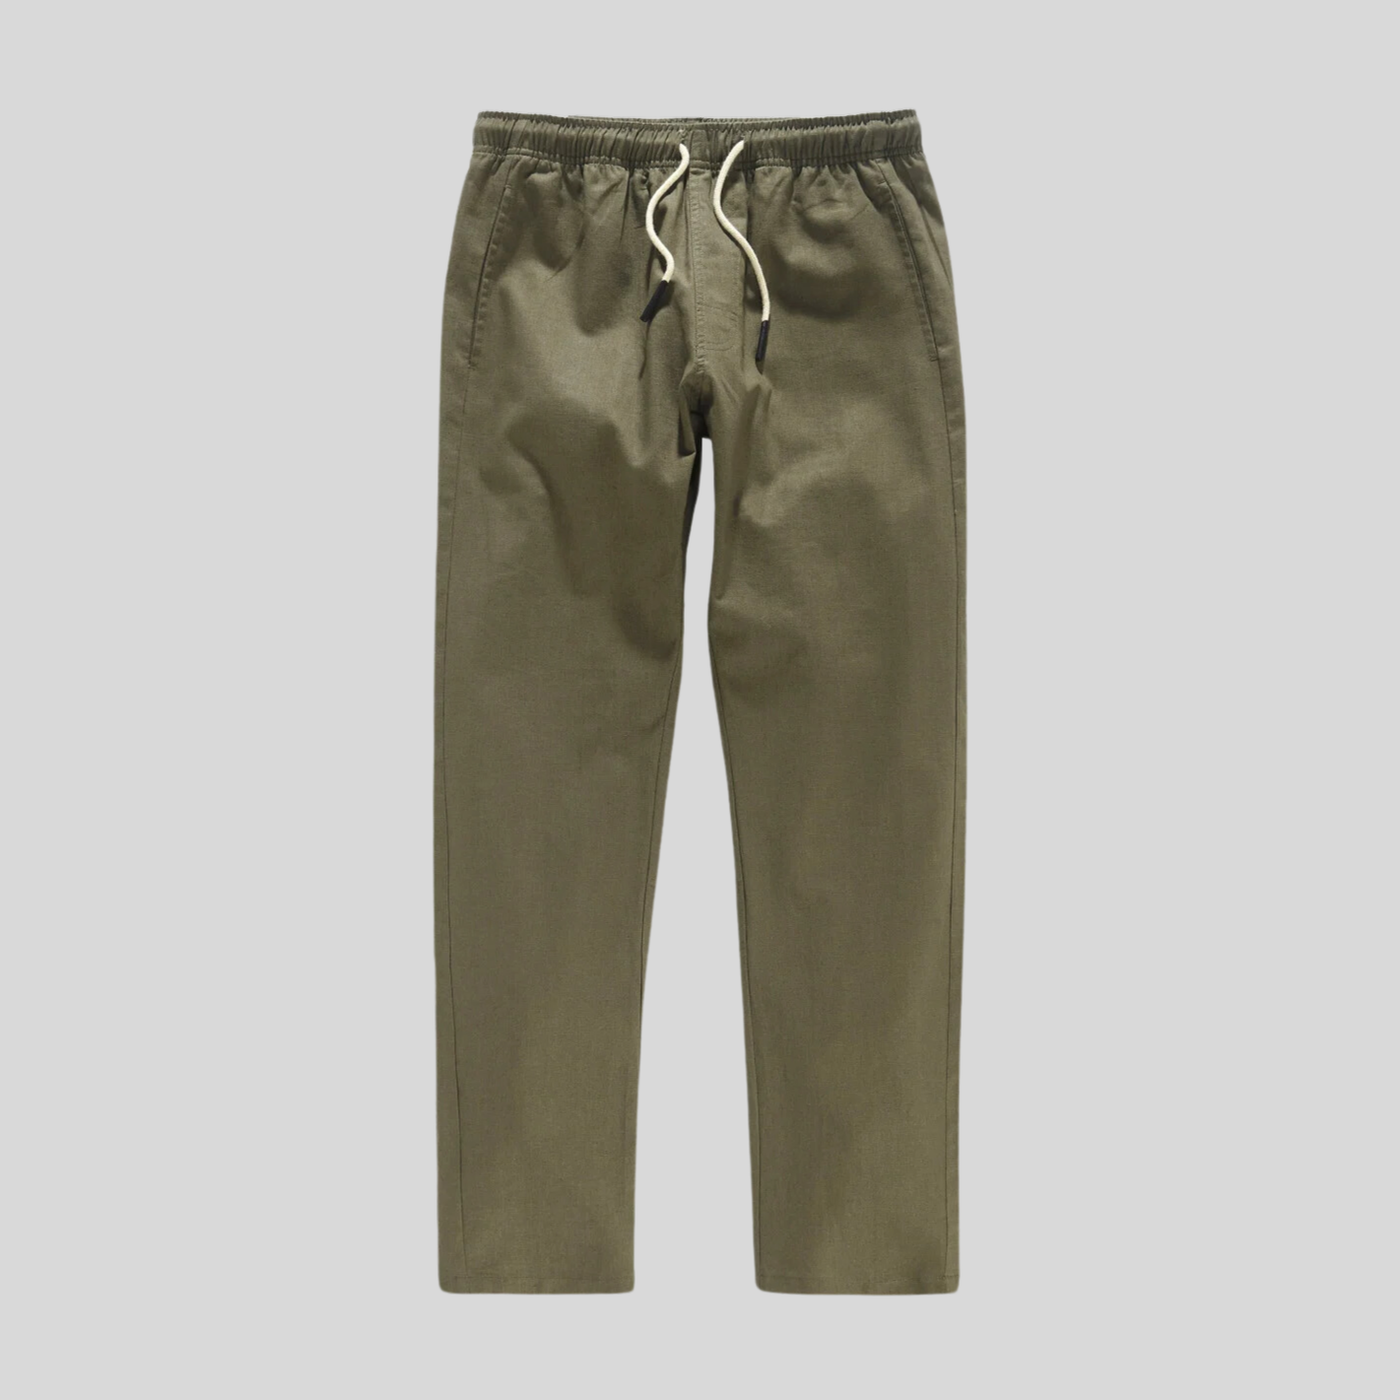 Gotstyle Fashion - OAS Pants Solid Linen Blend Drawstring Pants - Army